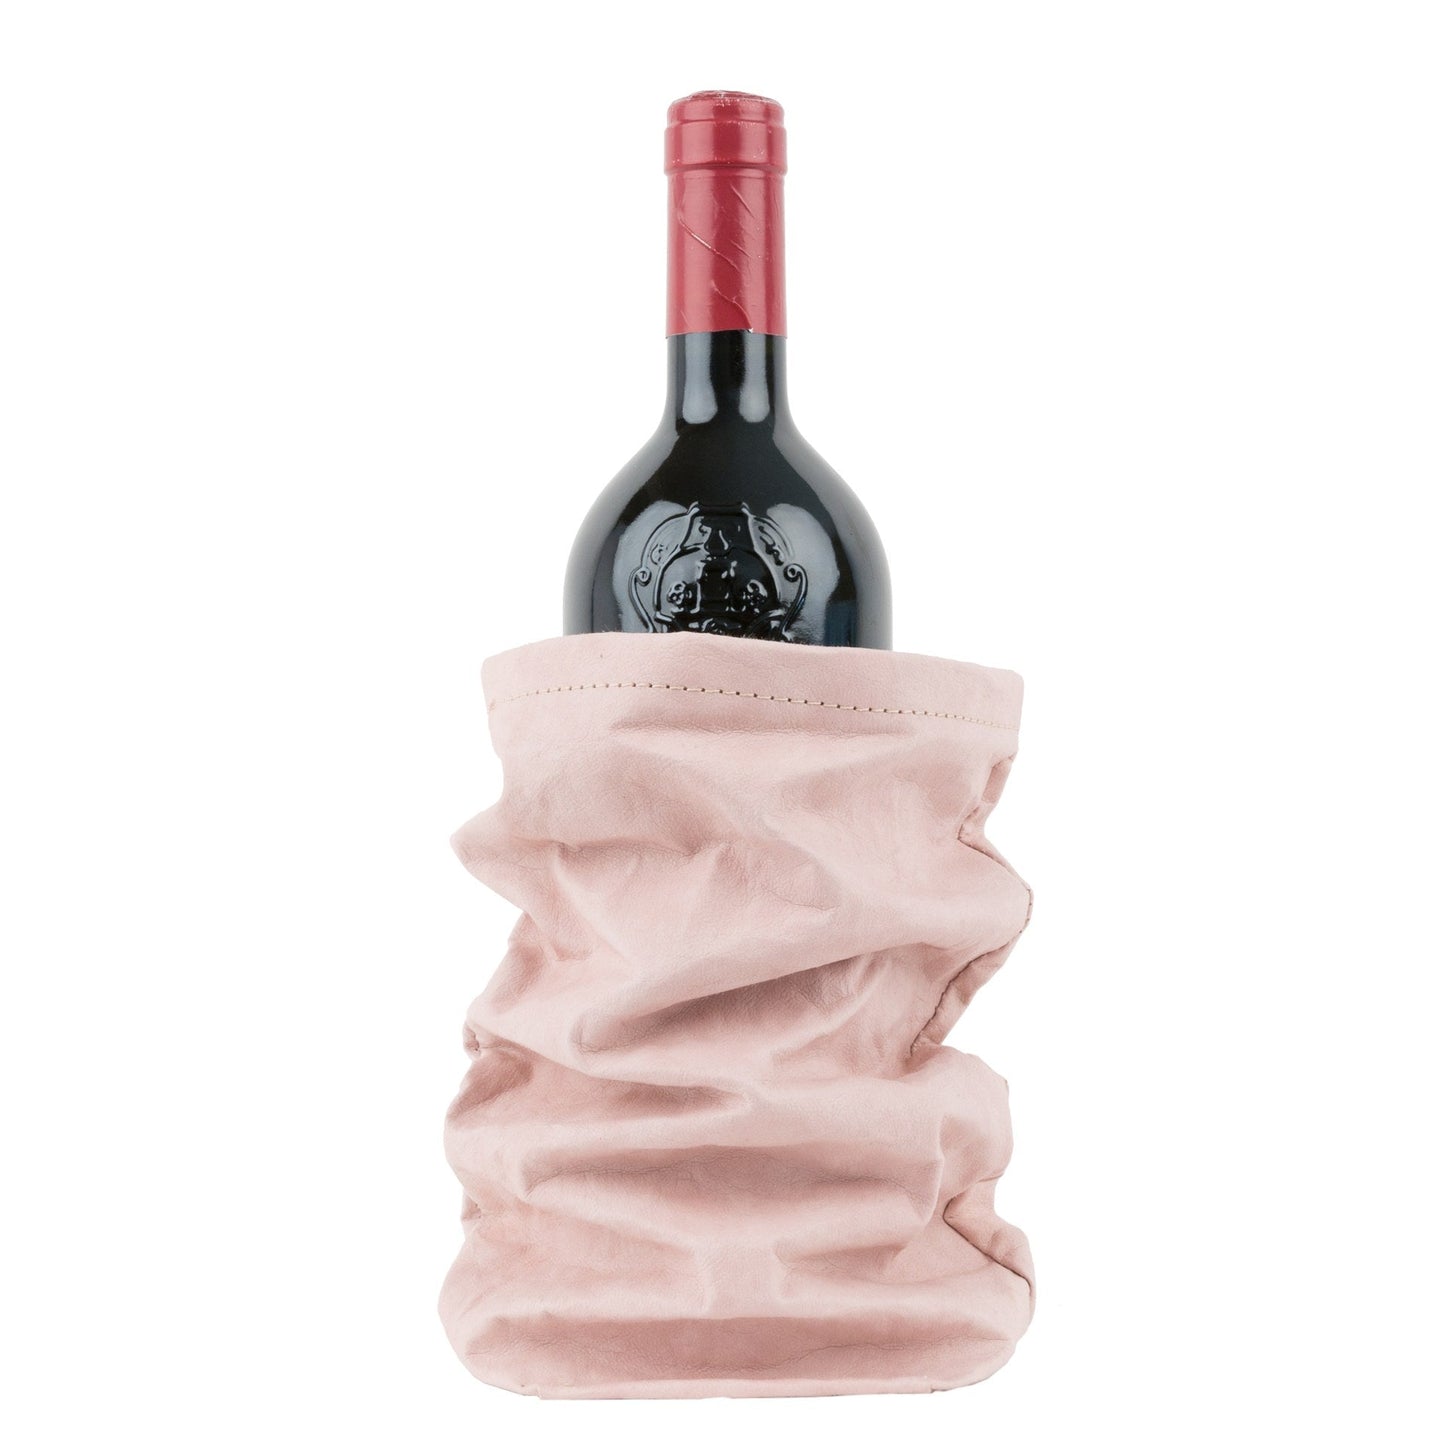 A bottle of red wine is shown inside a pale pink washable paper wine holder.